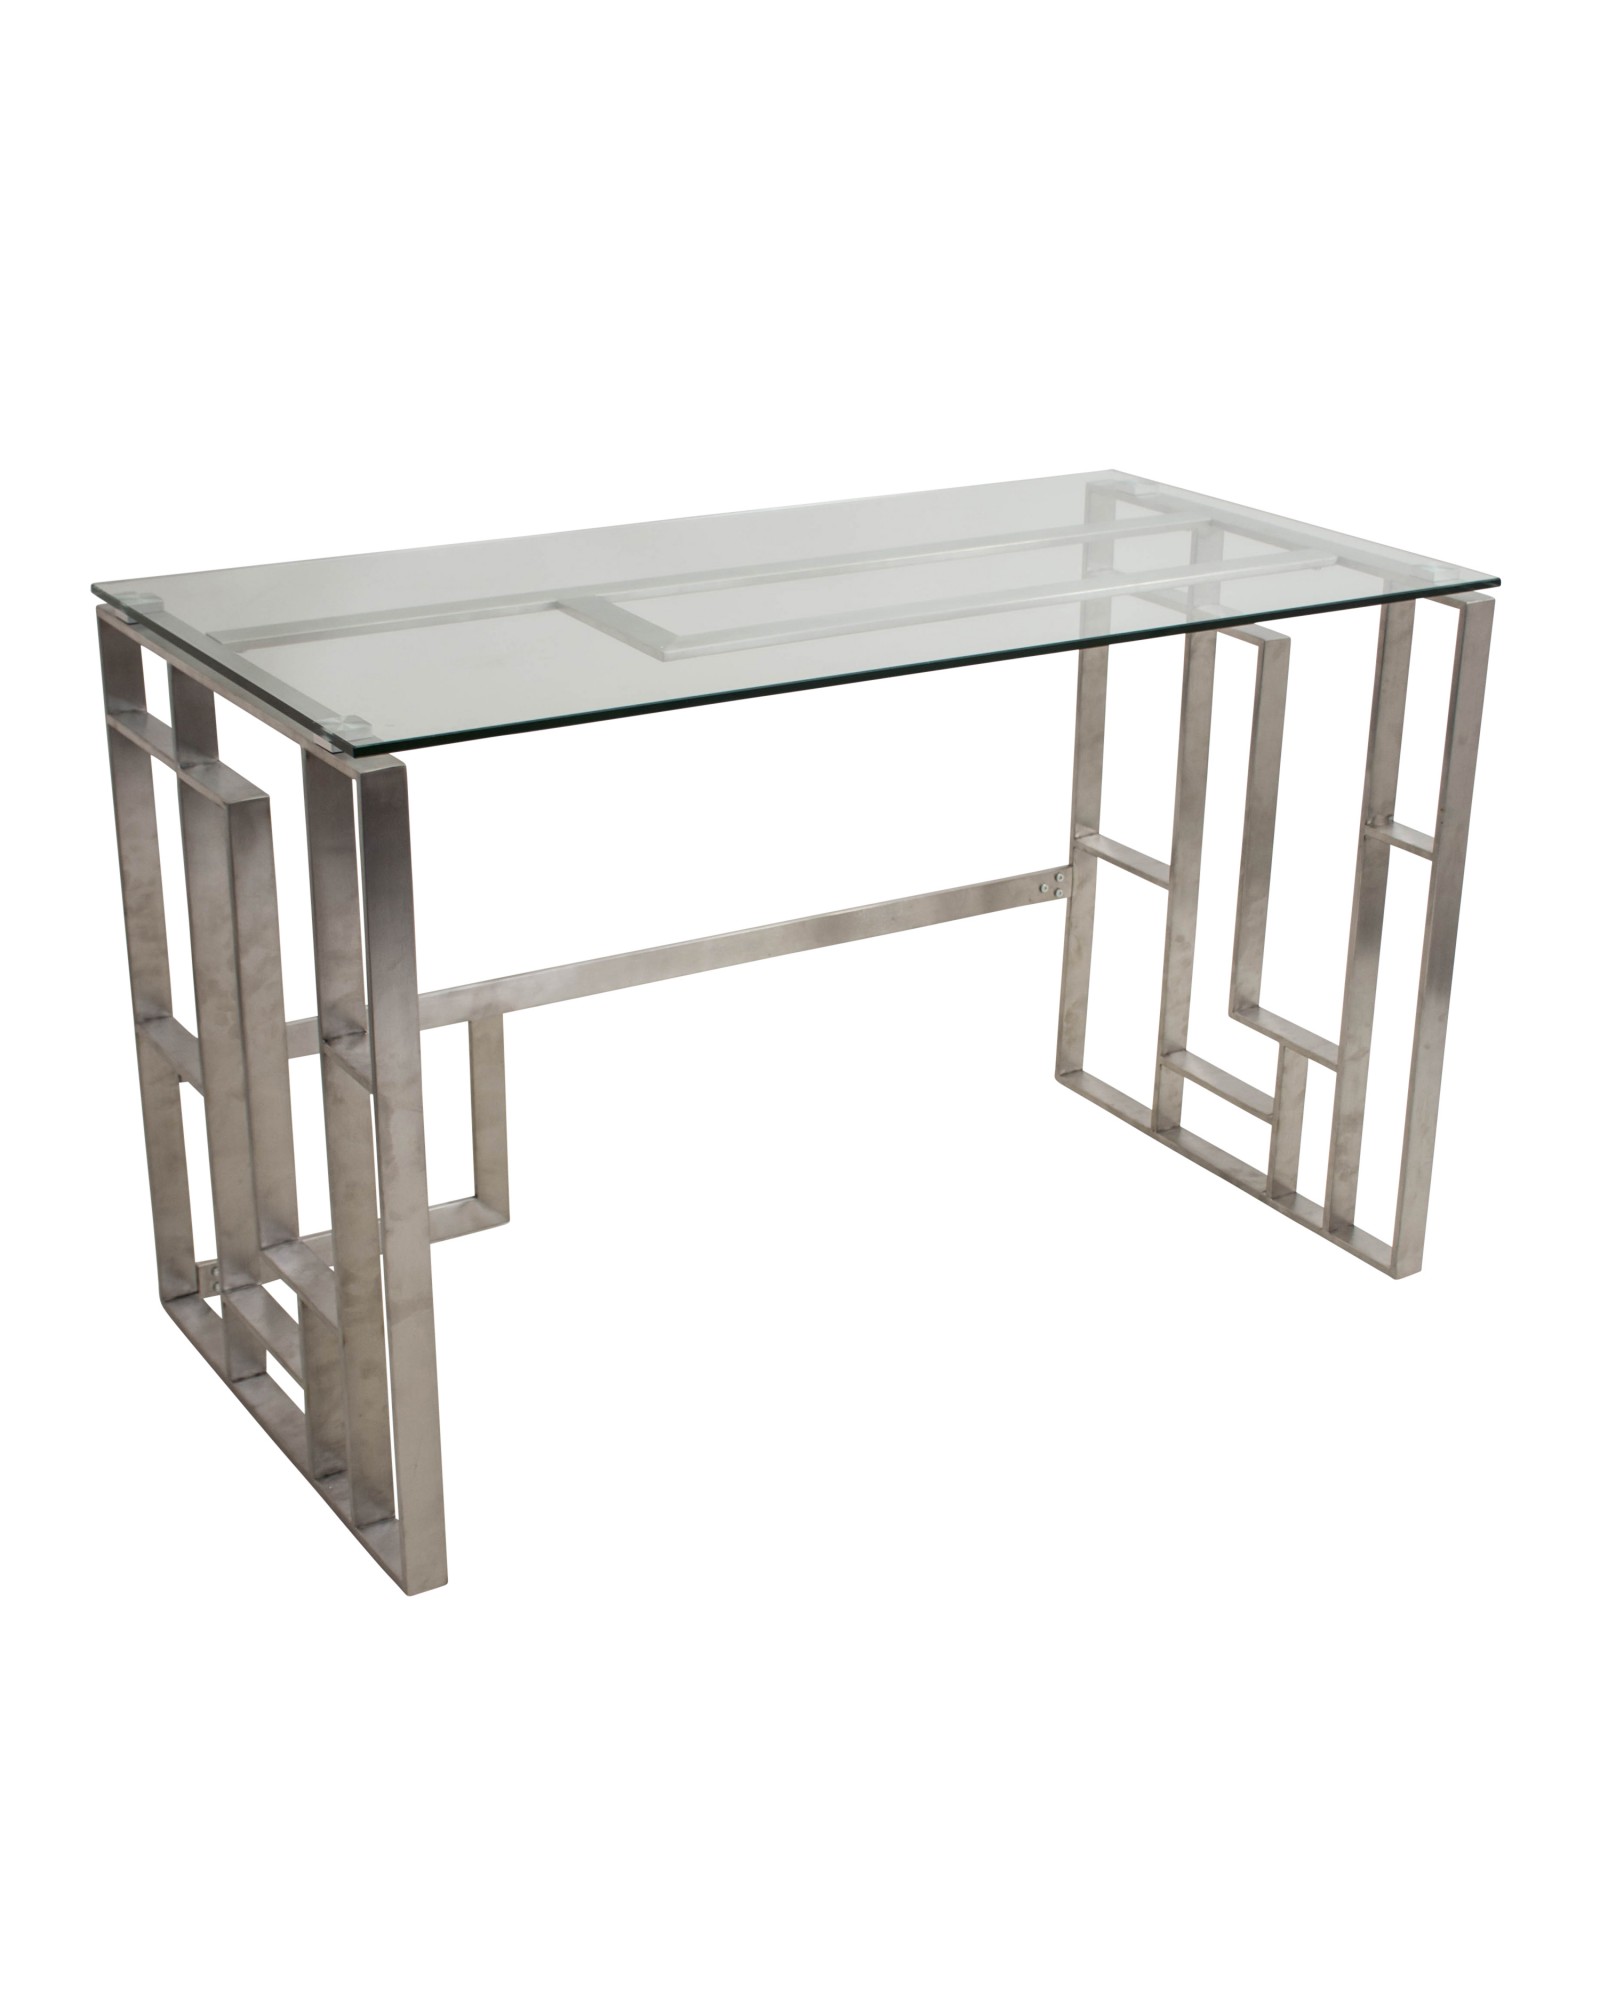 Mandarin Contemporary Desk in Brushed Stainless Steel and Clear Glass